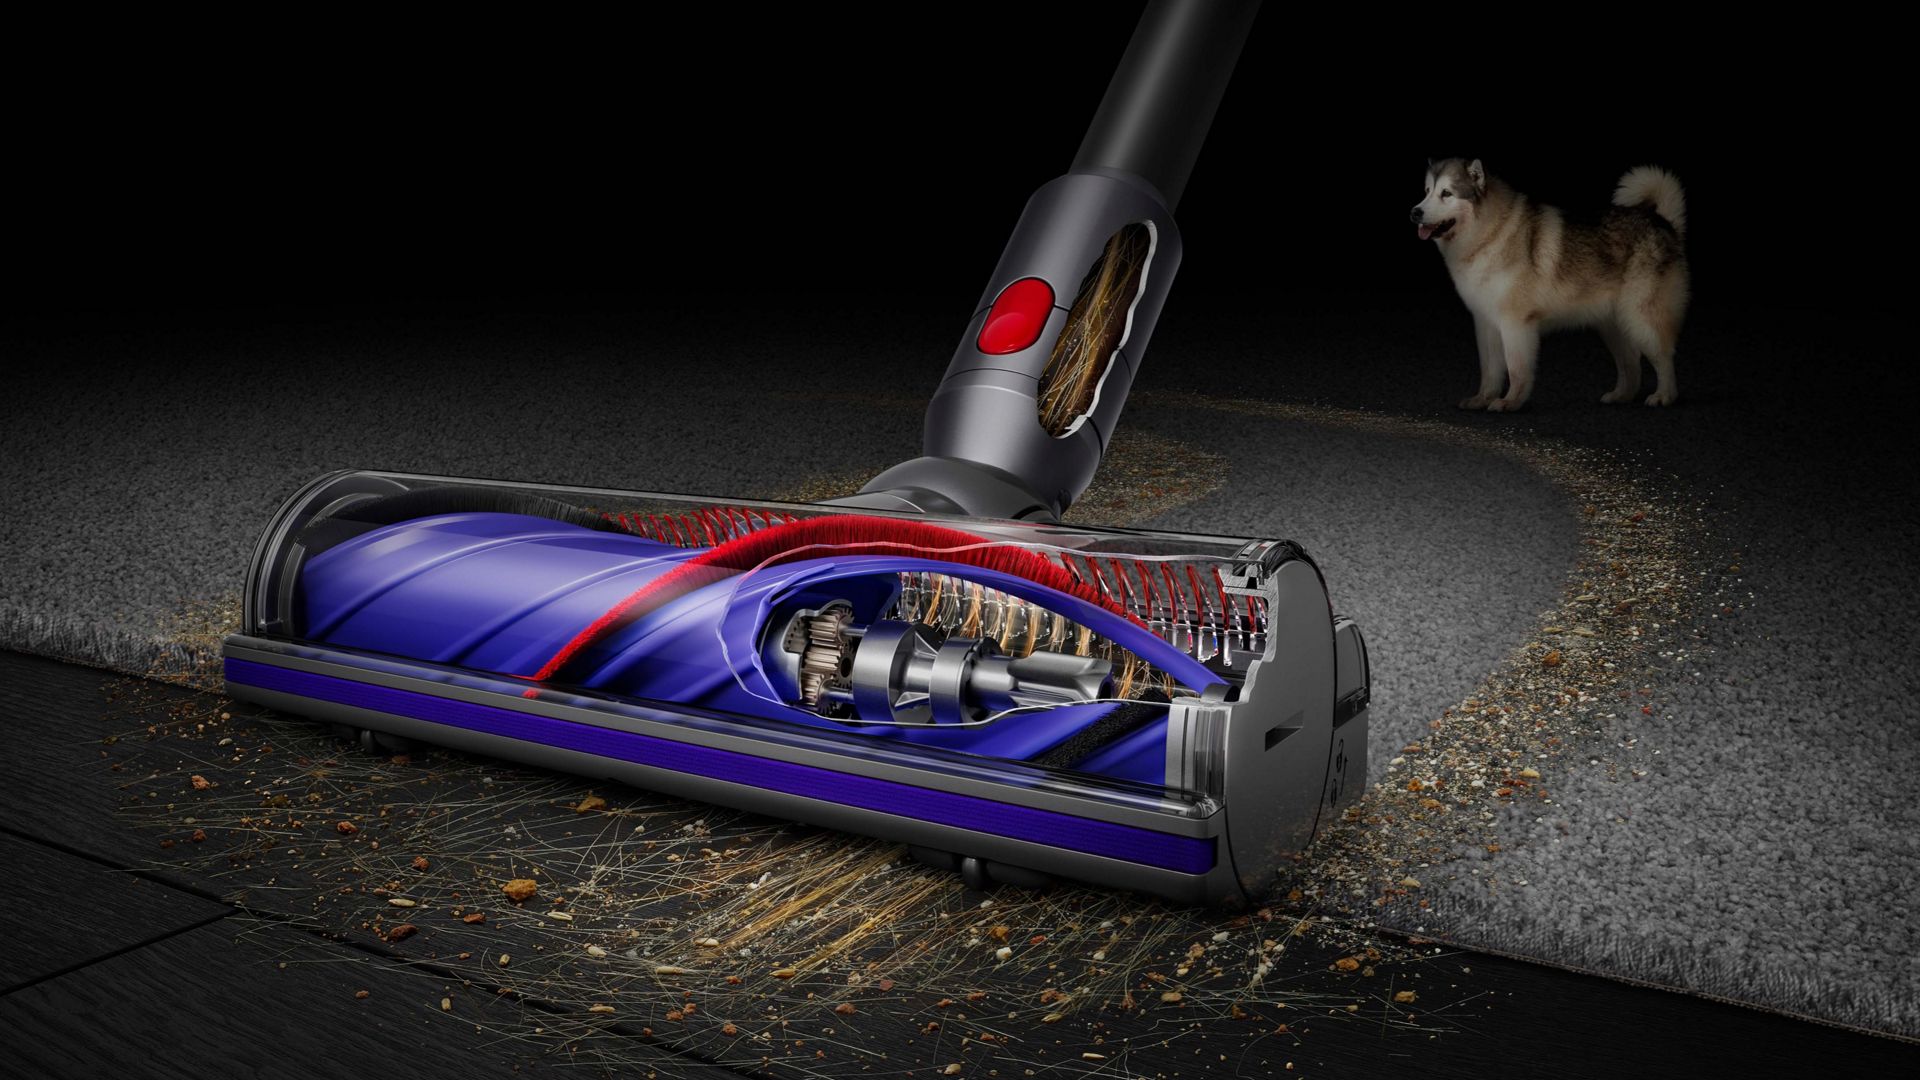 Dyson Fixed Its Humidifier With a Self-Cleaning Redesign